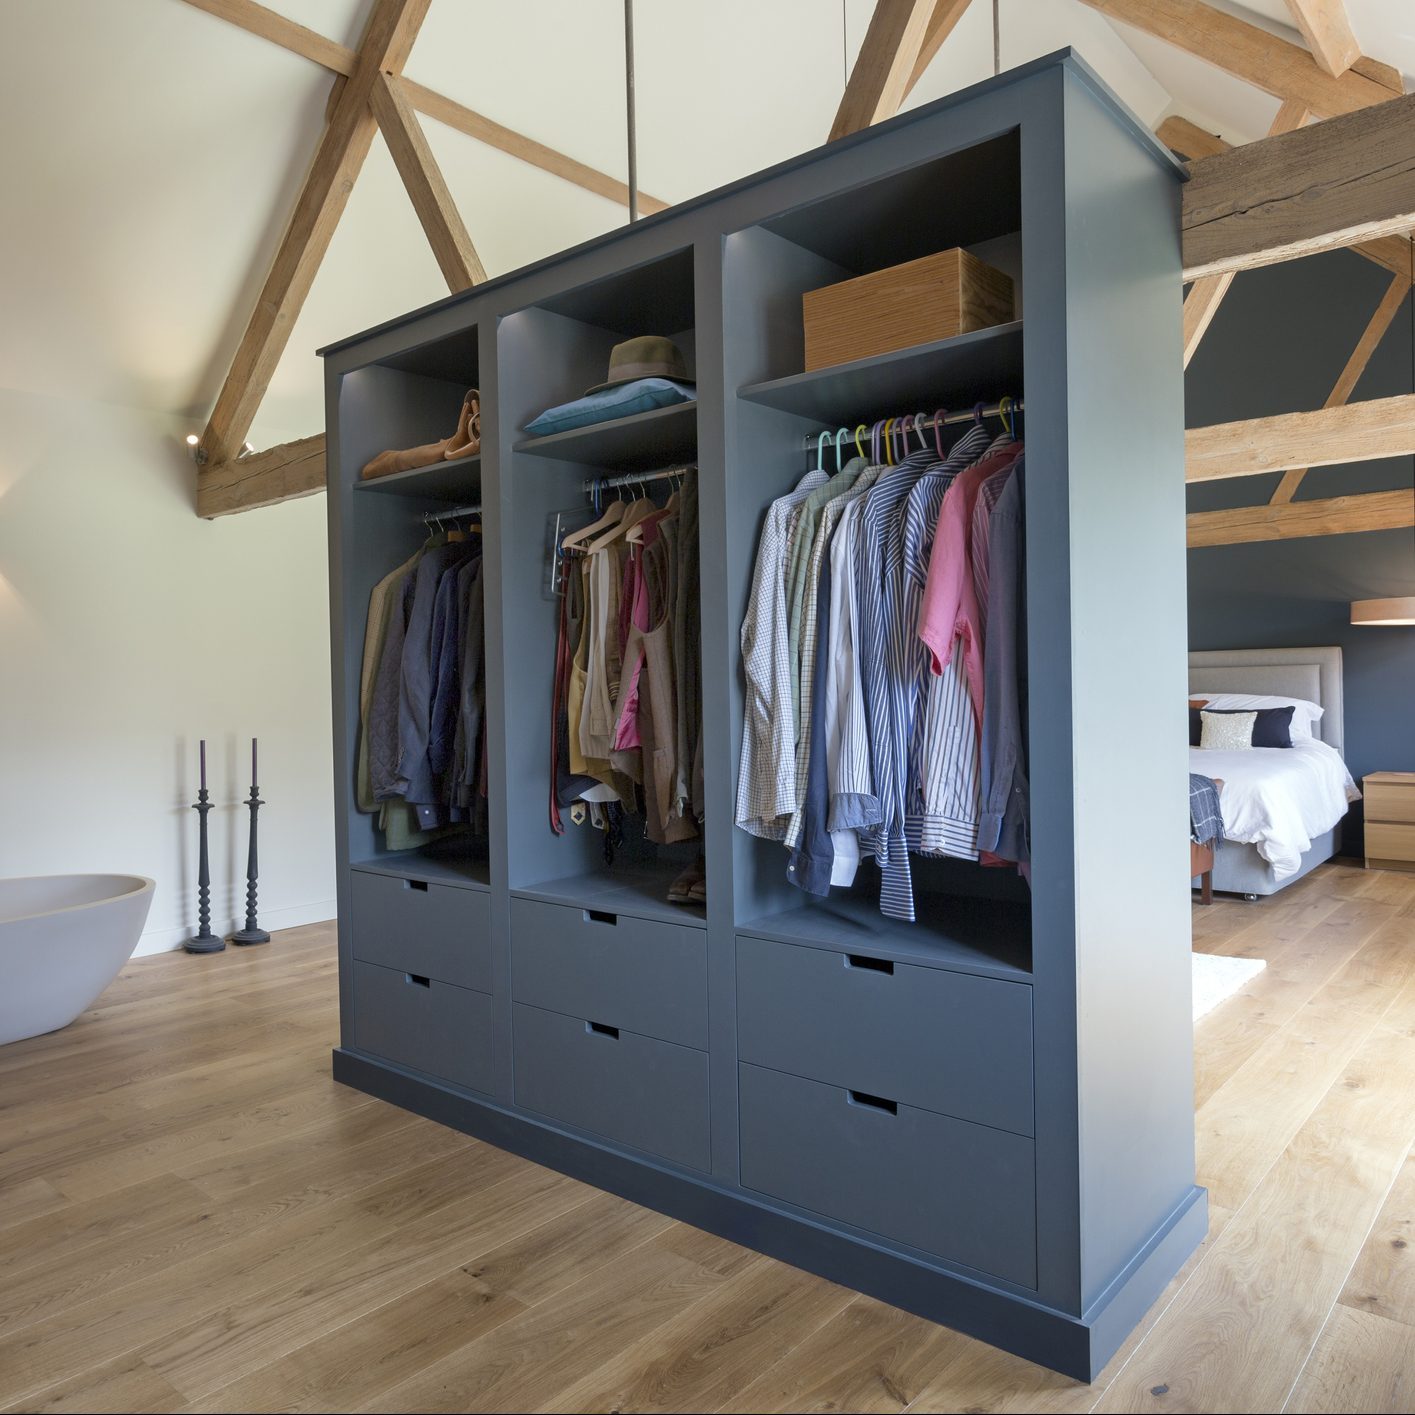 Best Clothing Storage Ideas Without a Closet  Bedroom storage ideas for  clothes, Closet clothes storage, Bedroom closet storage